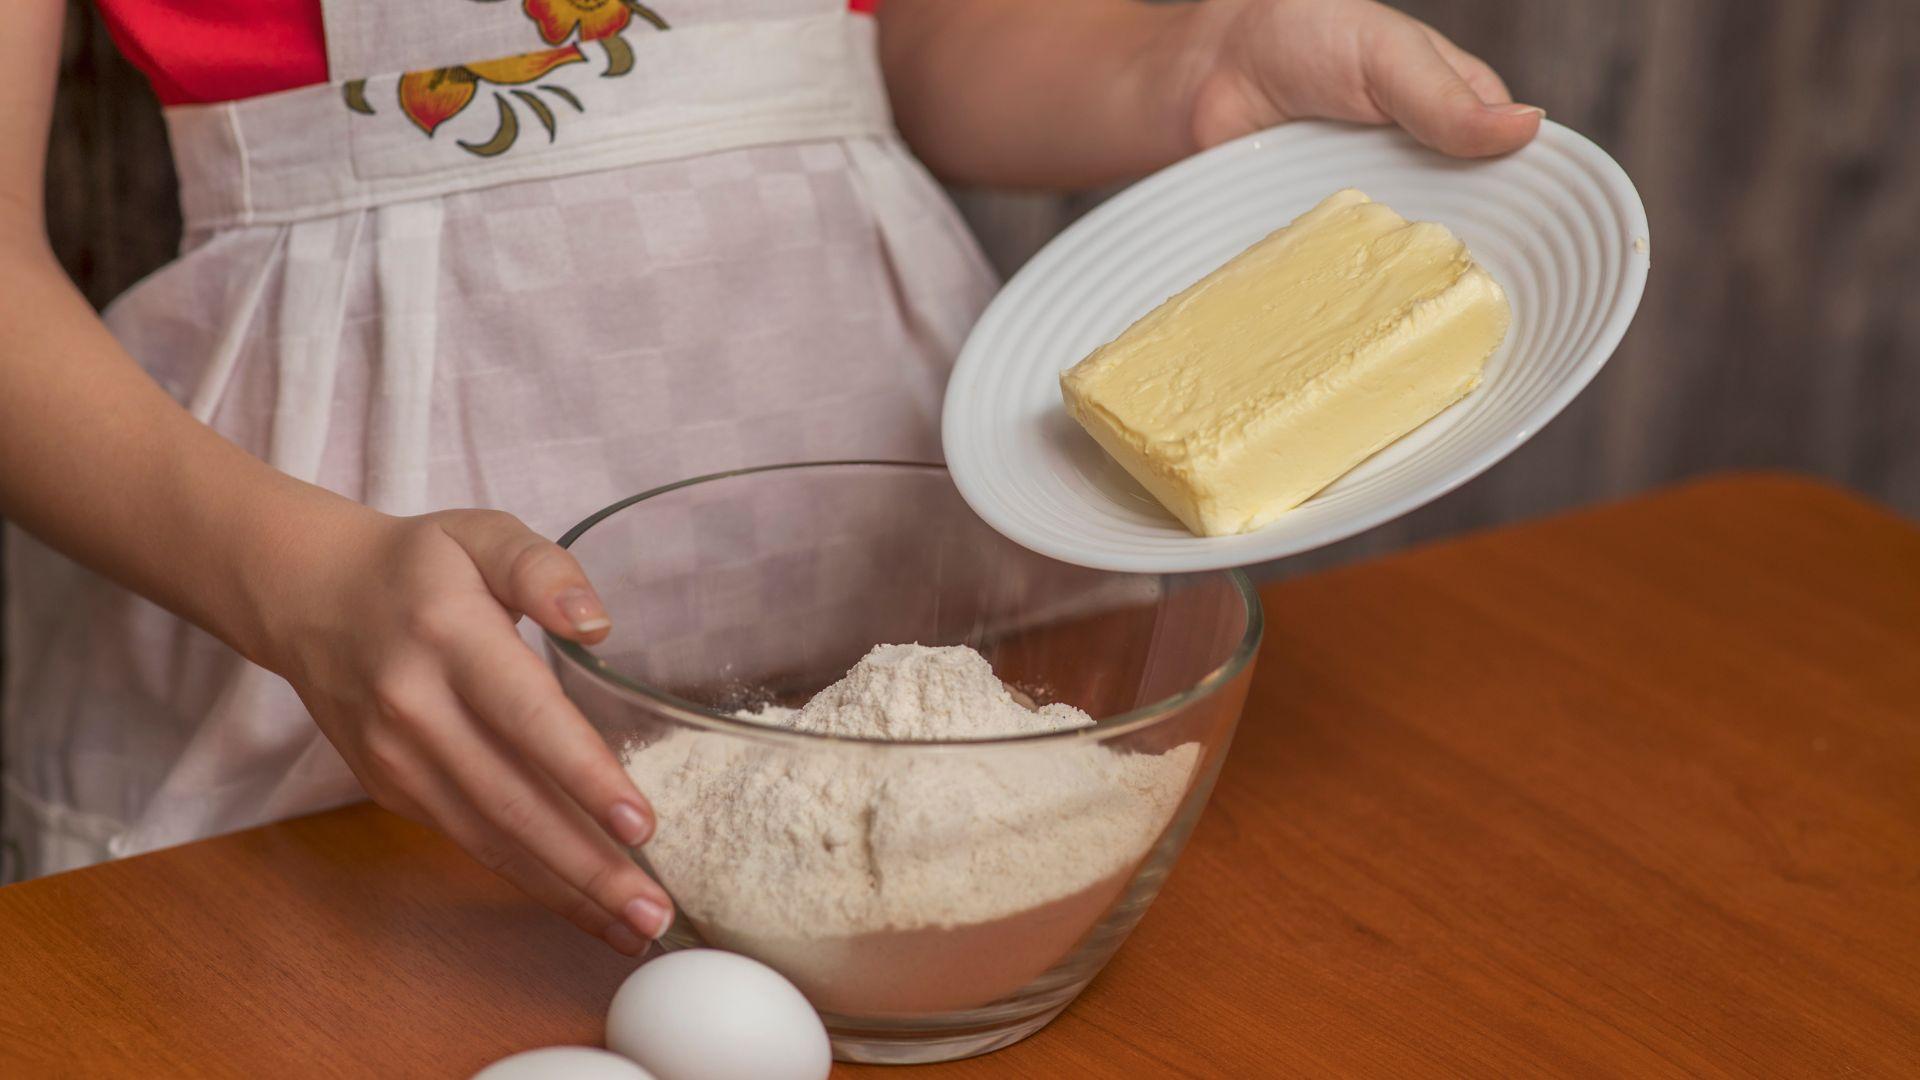 The girl adds butter to the cookie dough